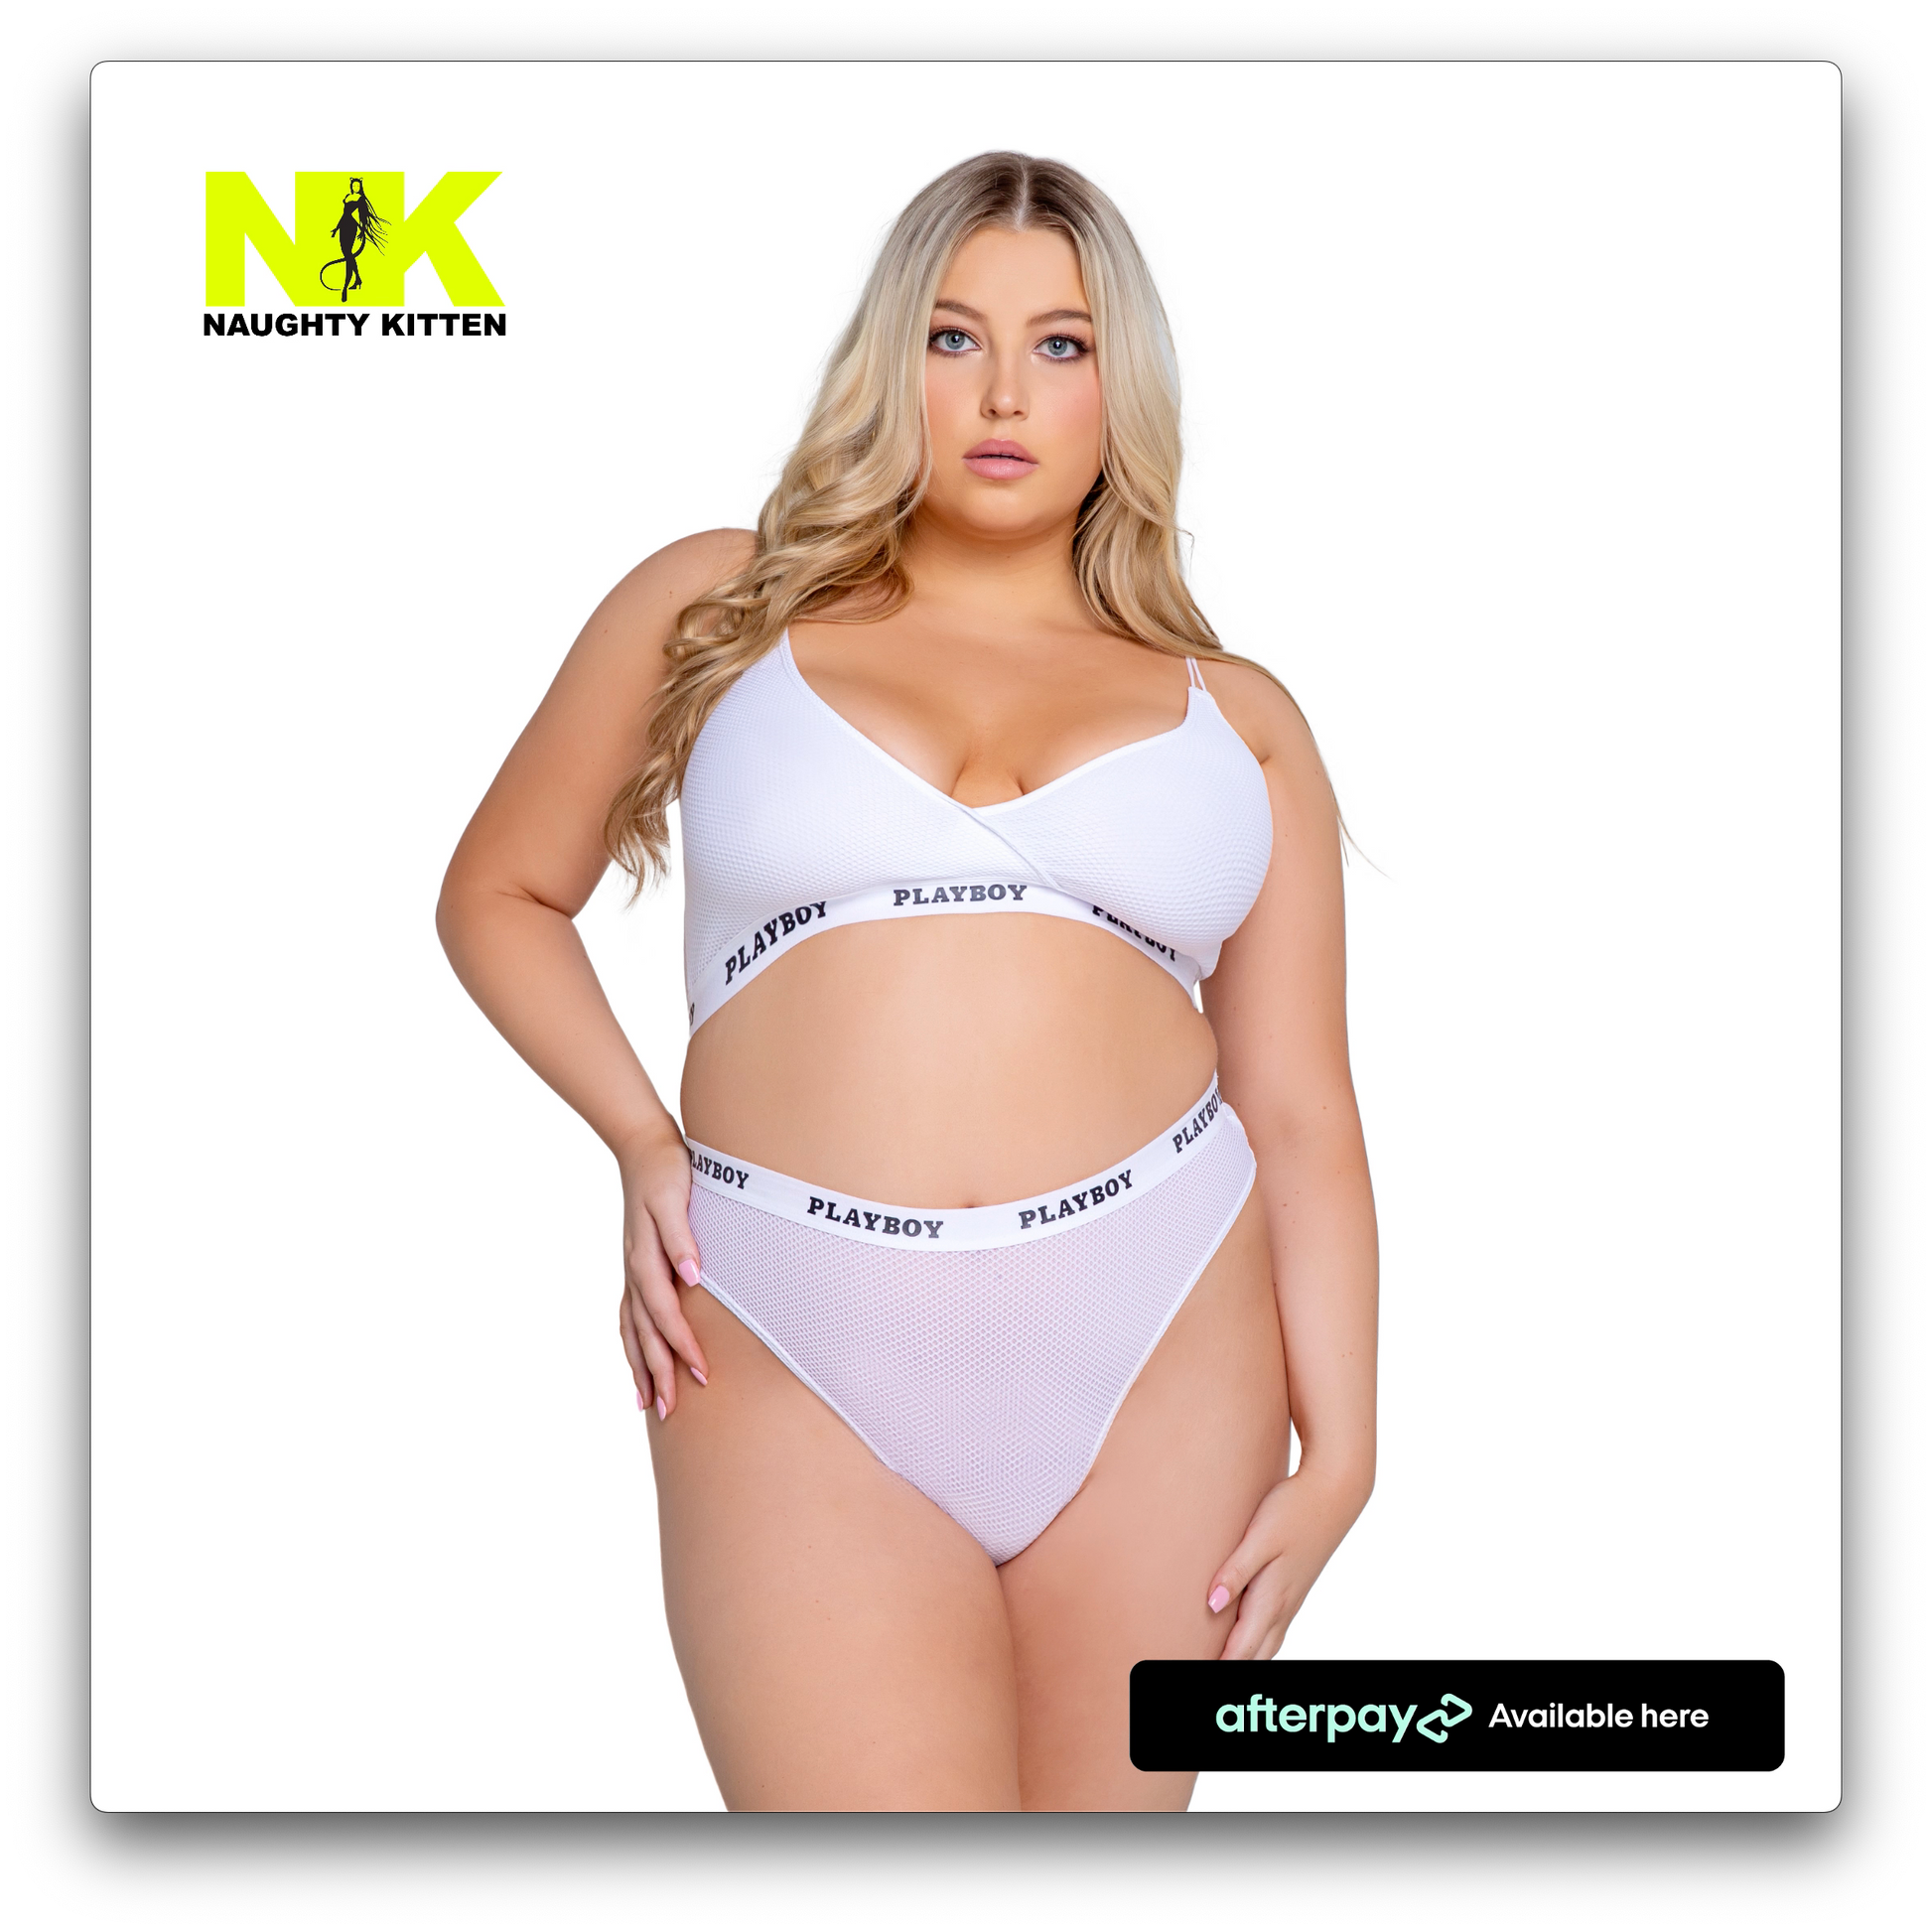  Naughty Kitten Clothing Playboy Lifestyle 2-Piece Set - White Front View Playboy Plus Size Lingerie